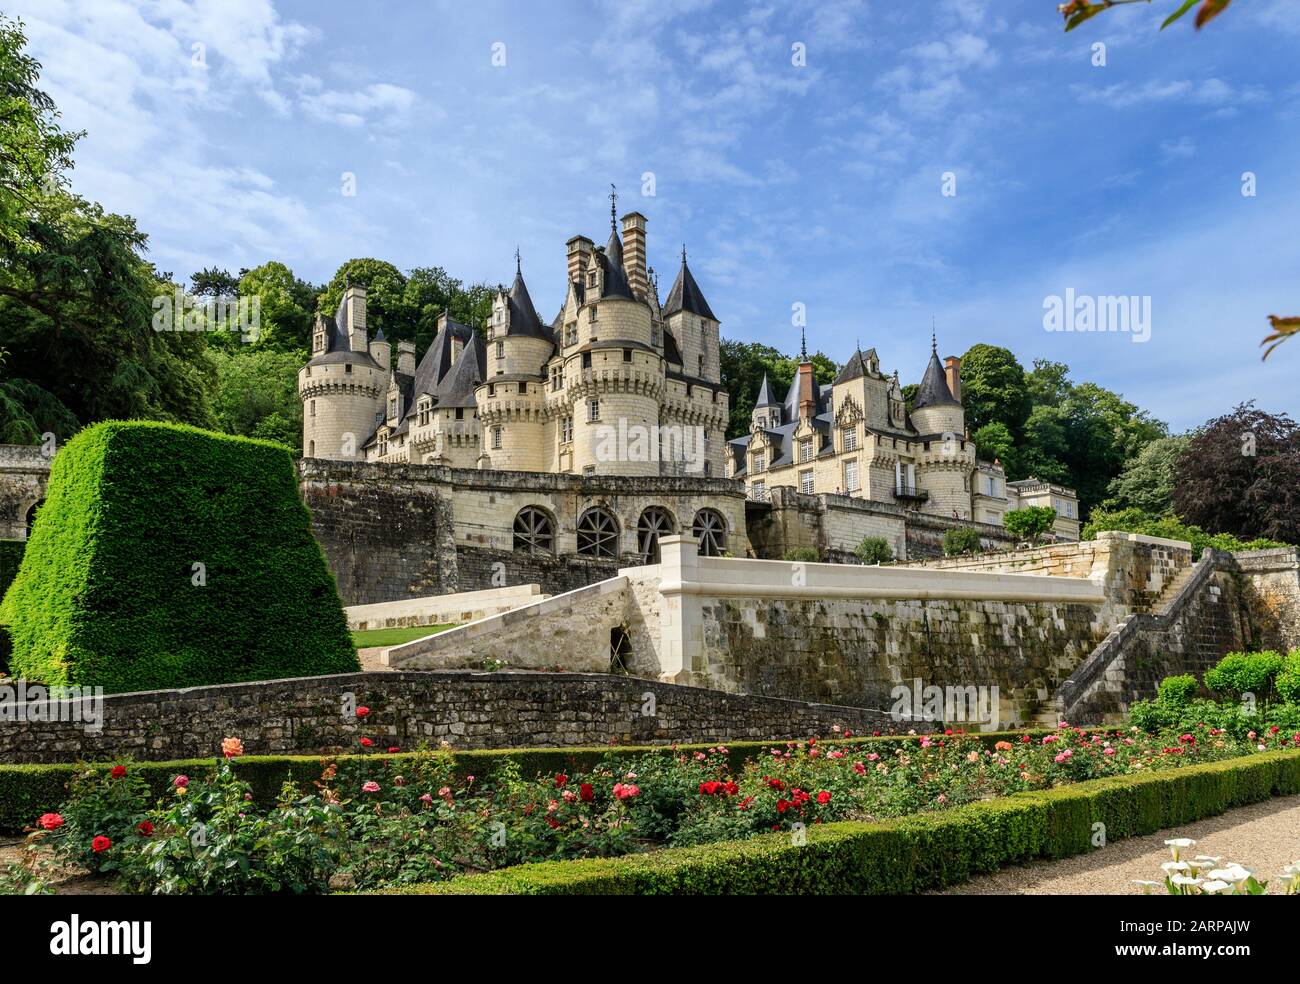 France, Indre et Loire, Loire Valley listed as World Heritage by UNESCO, Rigny Usse, Chateau d’Usse gardens, Medieval and Renaissance Inspiration cast Stock Photo